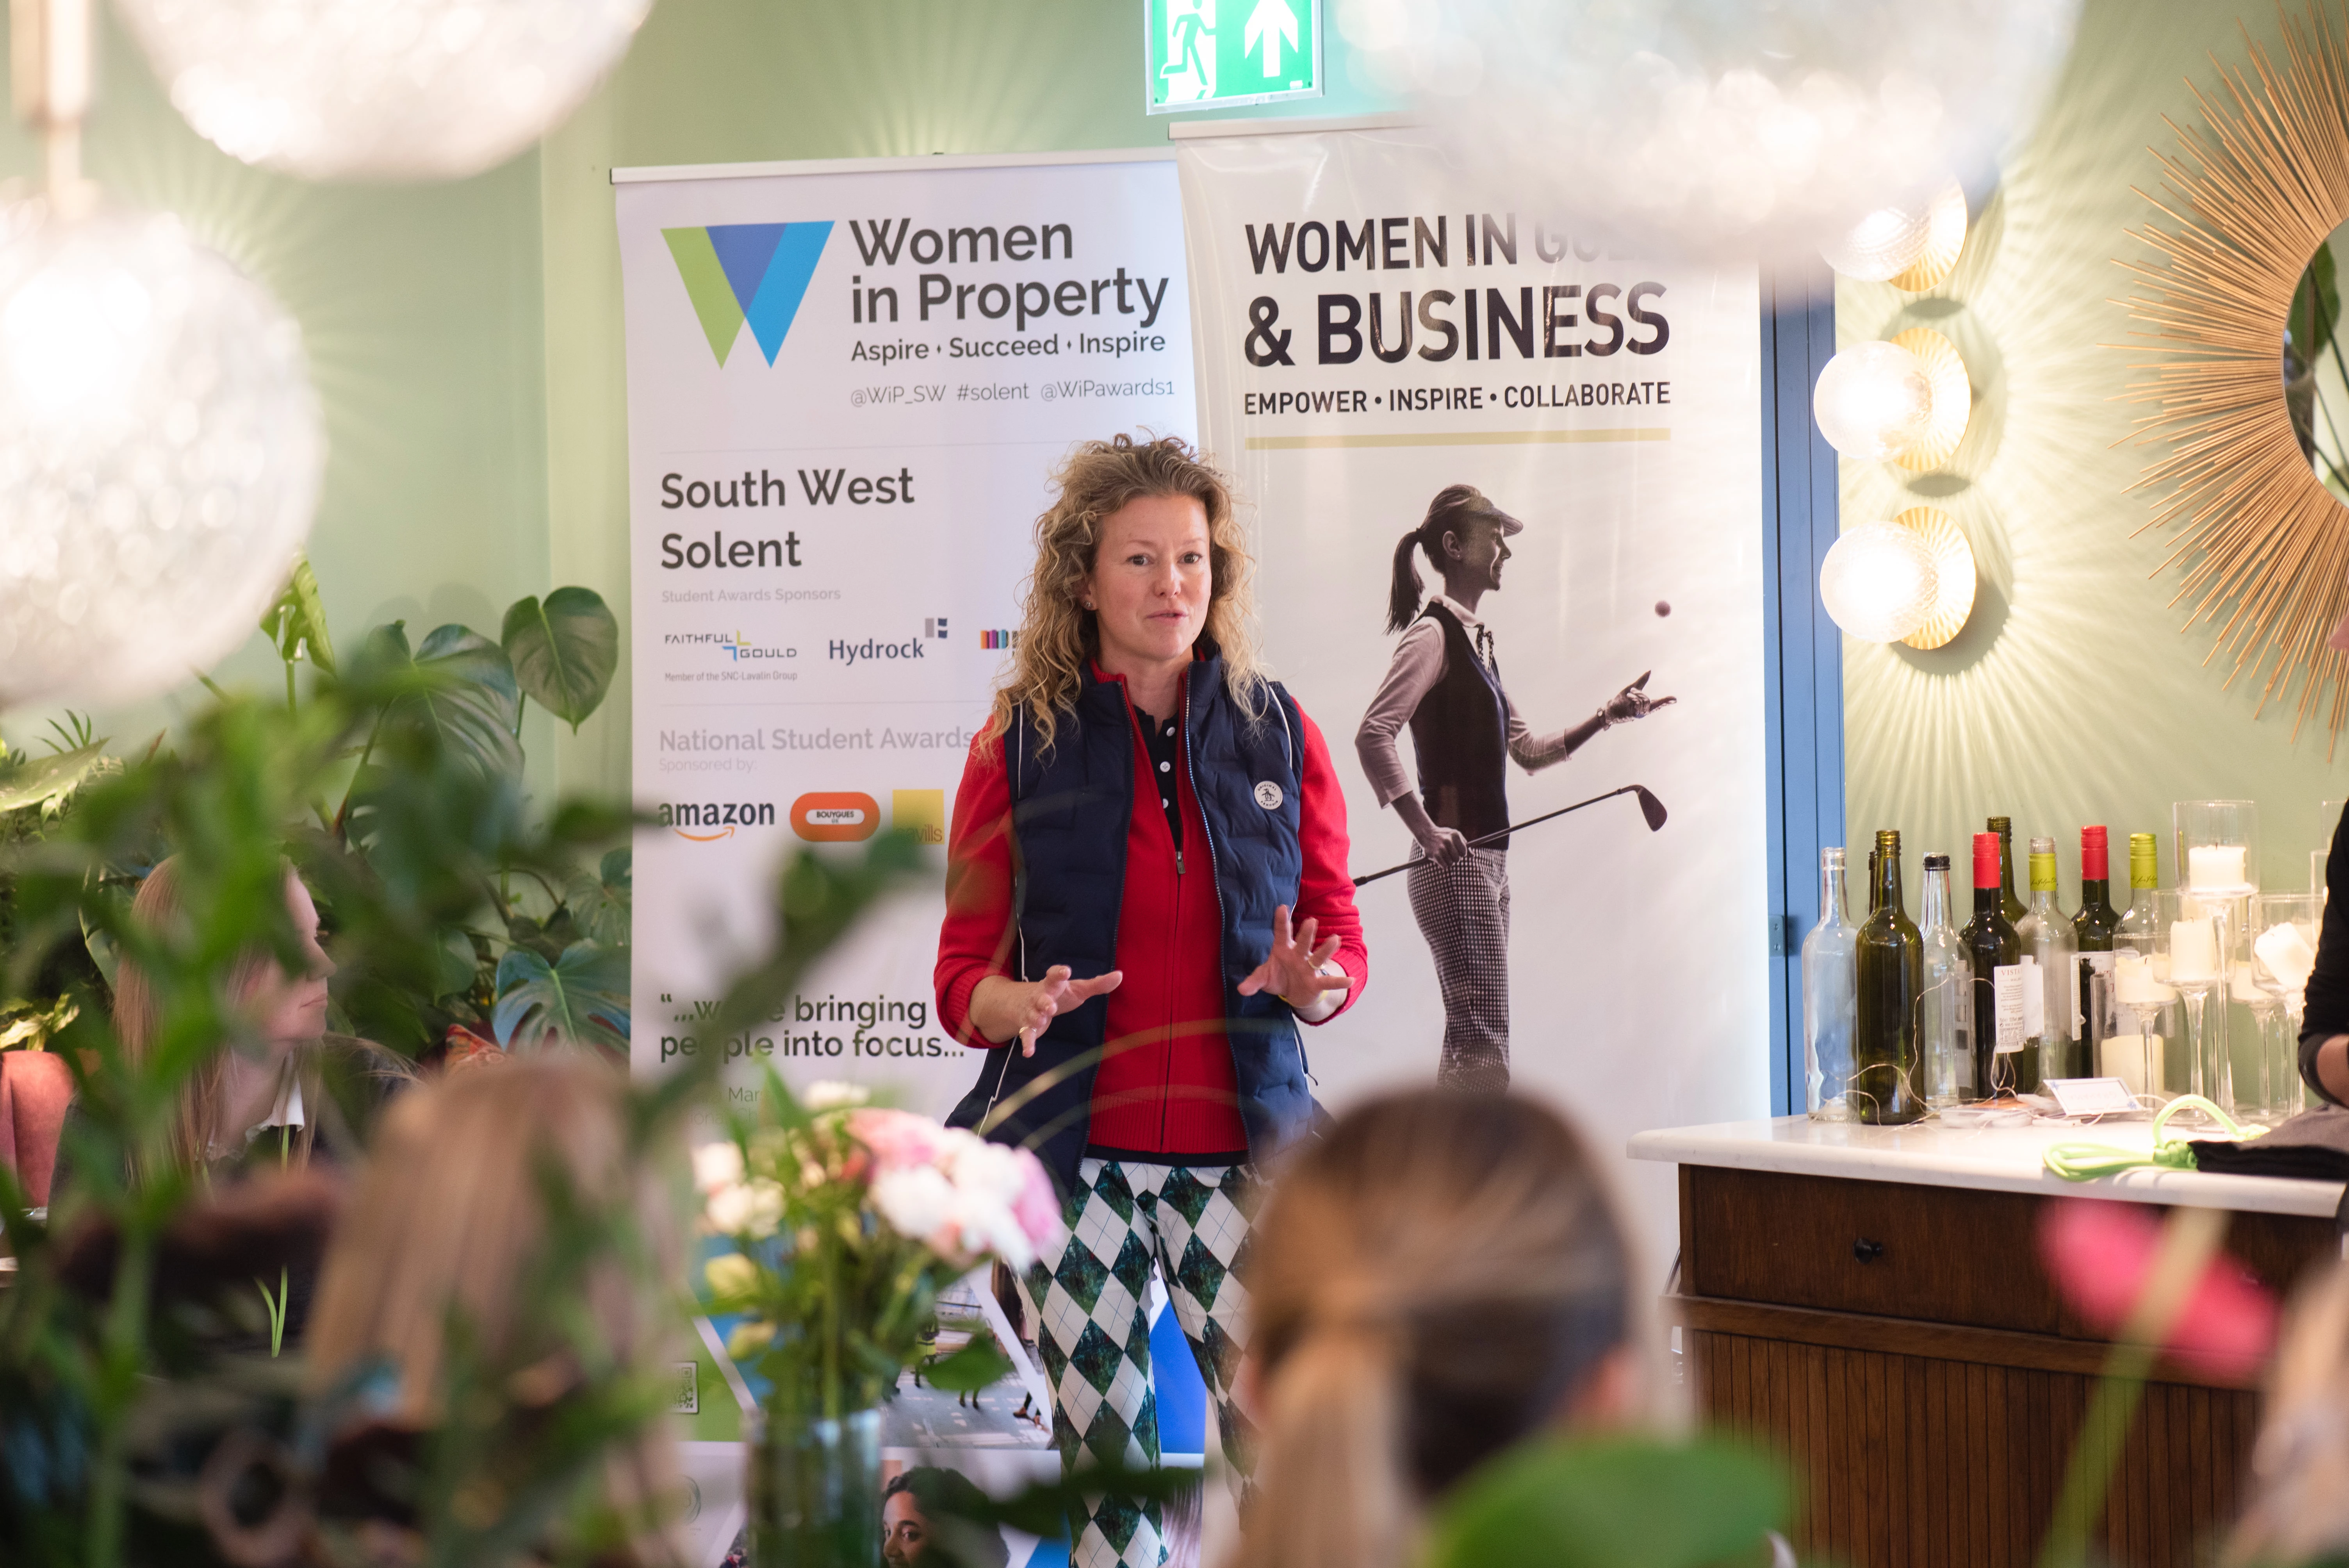 Women in Property golf event